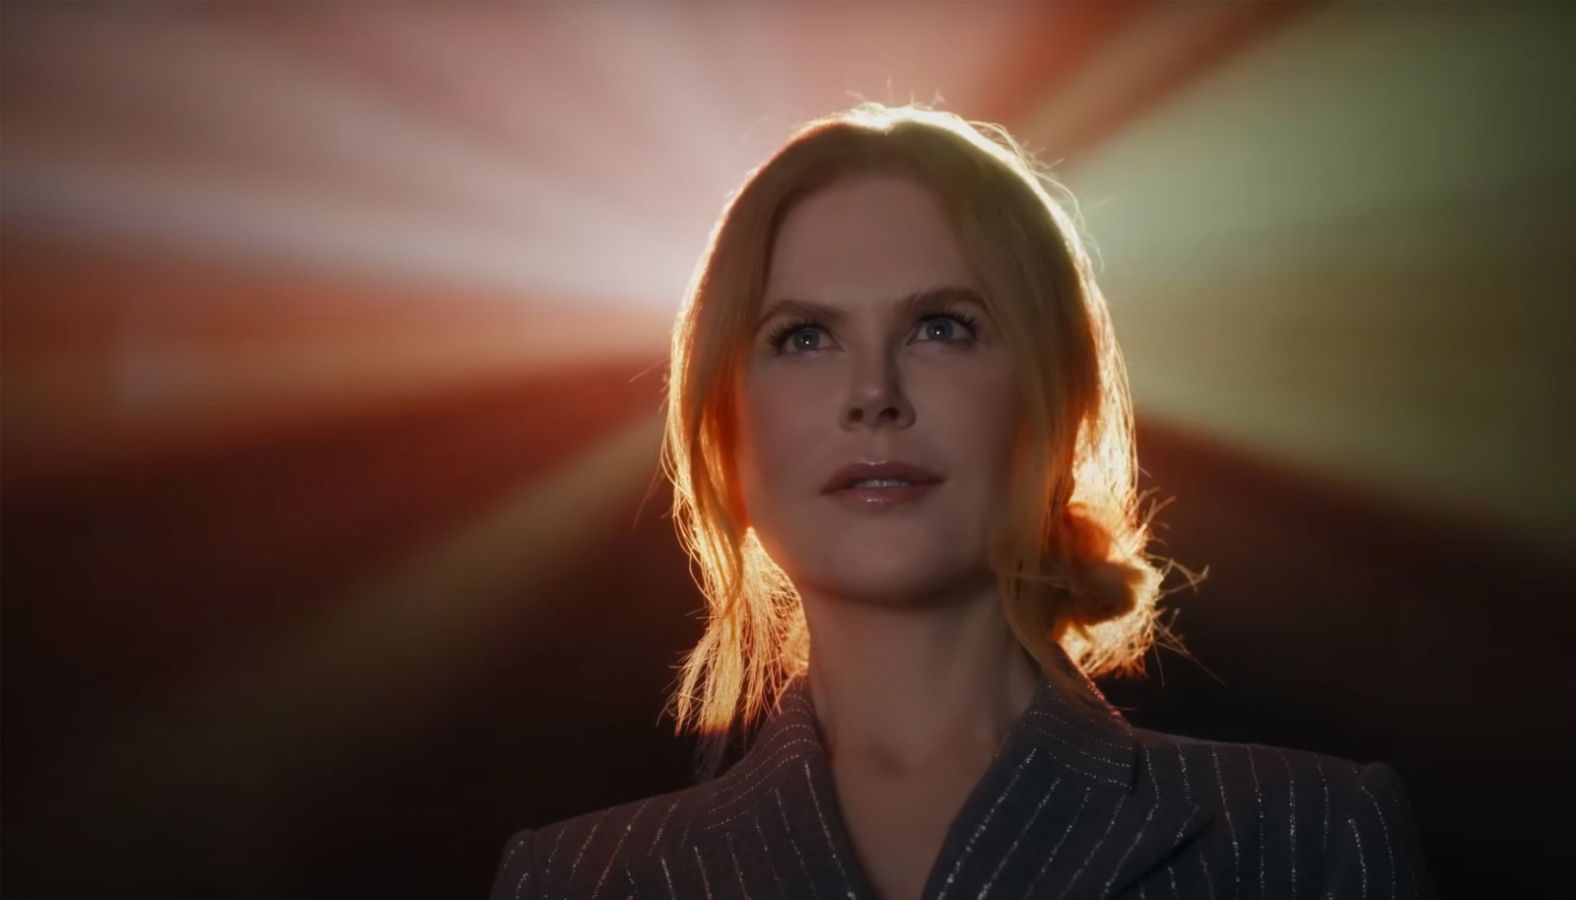 Kidman's AMC Theaters ad campaign, which debuted in 2021 and appears before the start of movies at the cinema chain, <a href="https://www.cnn.com/2024/03/19/entertainment/nicole-kidman-say-she-hopes-amc-ad-will-help-keep-the-magic-of-movies-alive/index.html" target="_blank">have become a meme</a> that Kidman has embraced. She told Elle magazine this year that she took on the project out of her "desire to keep cinemas alive."